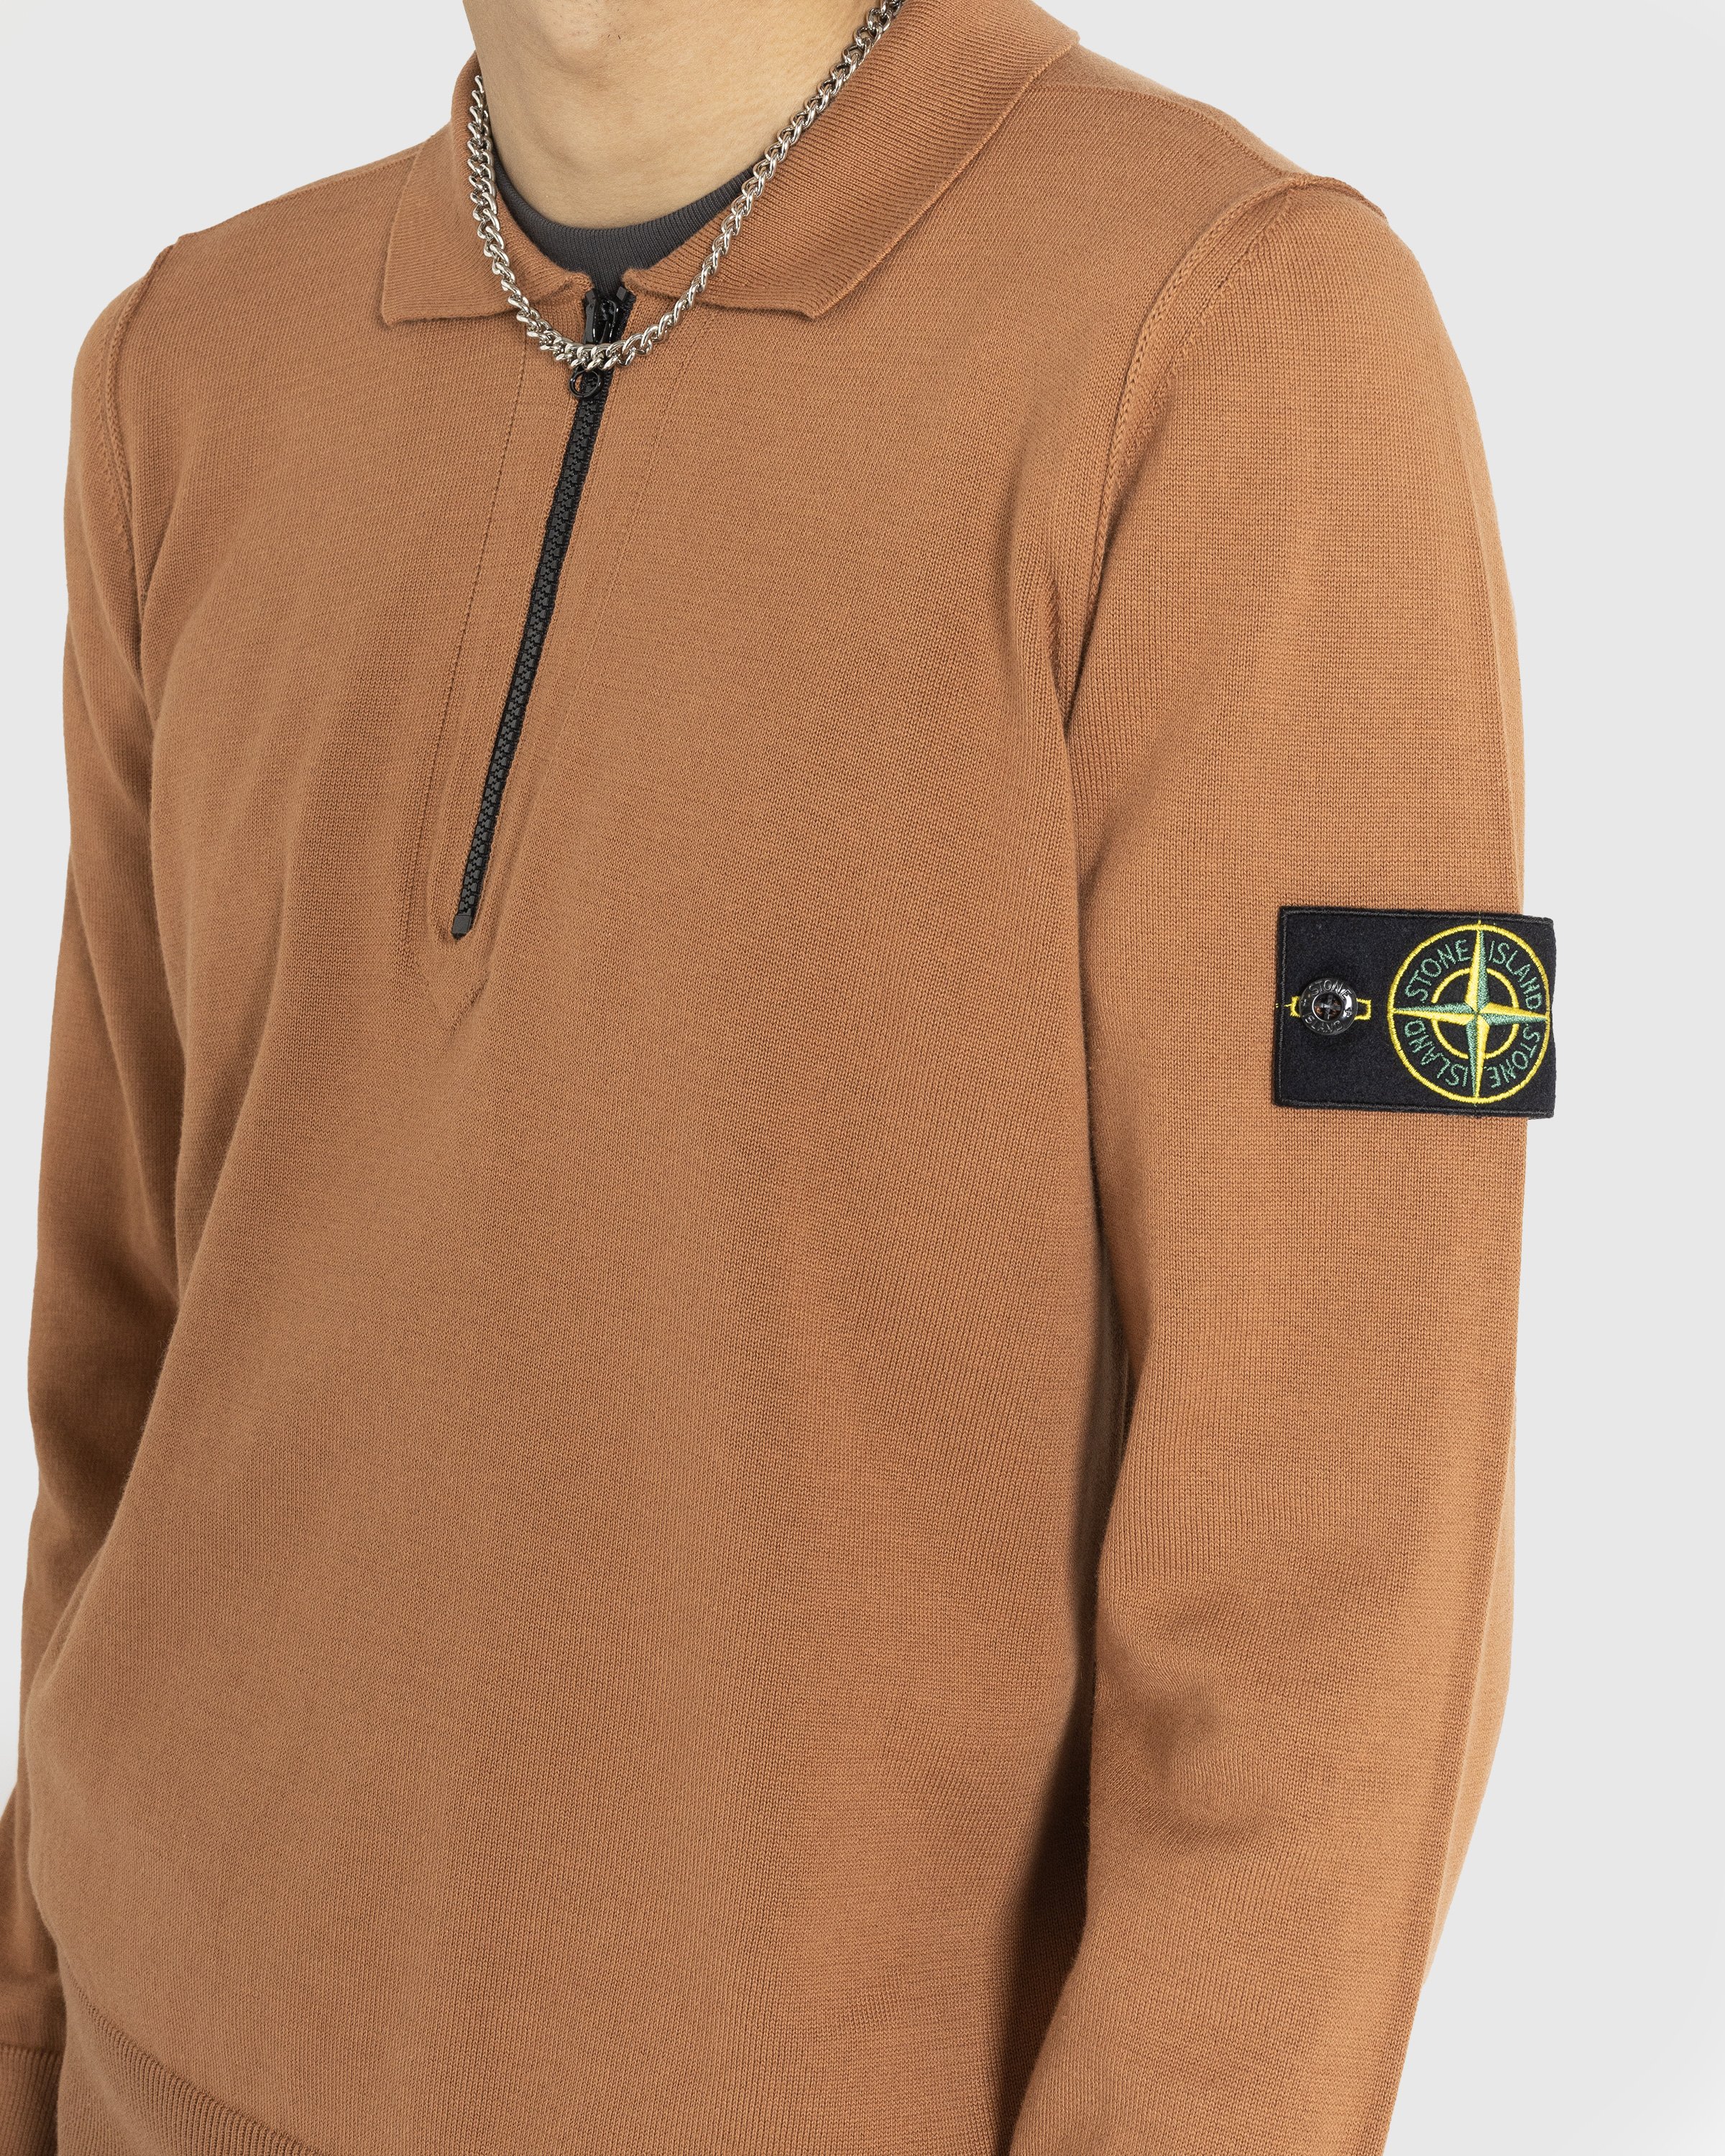 Stone Island - KNITWEAR RUST - Clothing - Red - Image 5